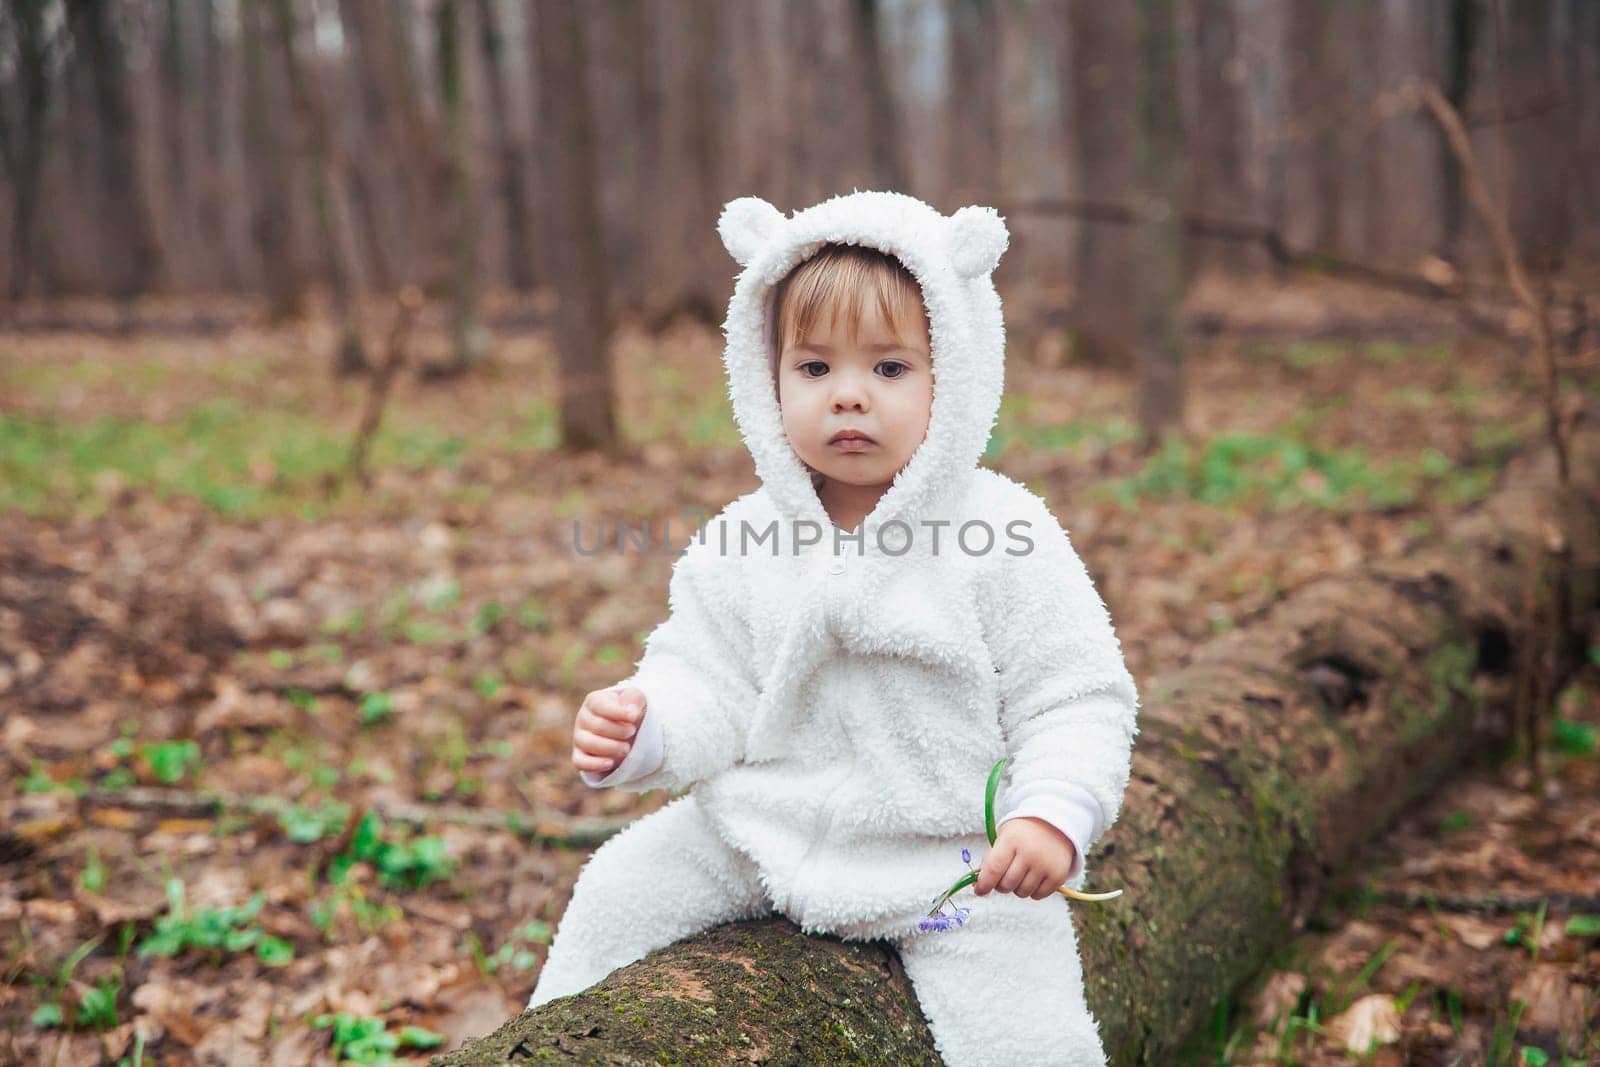 Adorable baby in a bear costume in the forest by a fallen tree by Viktor_Osypenko